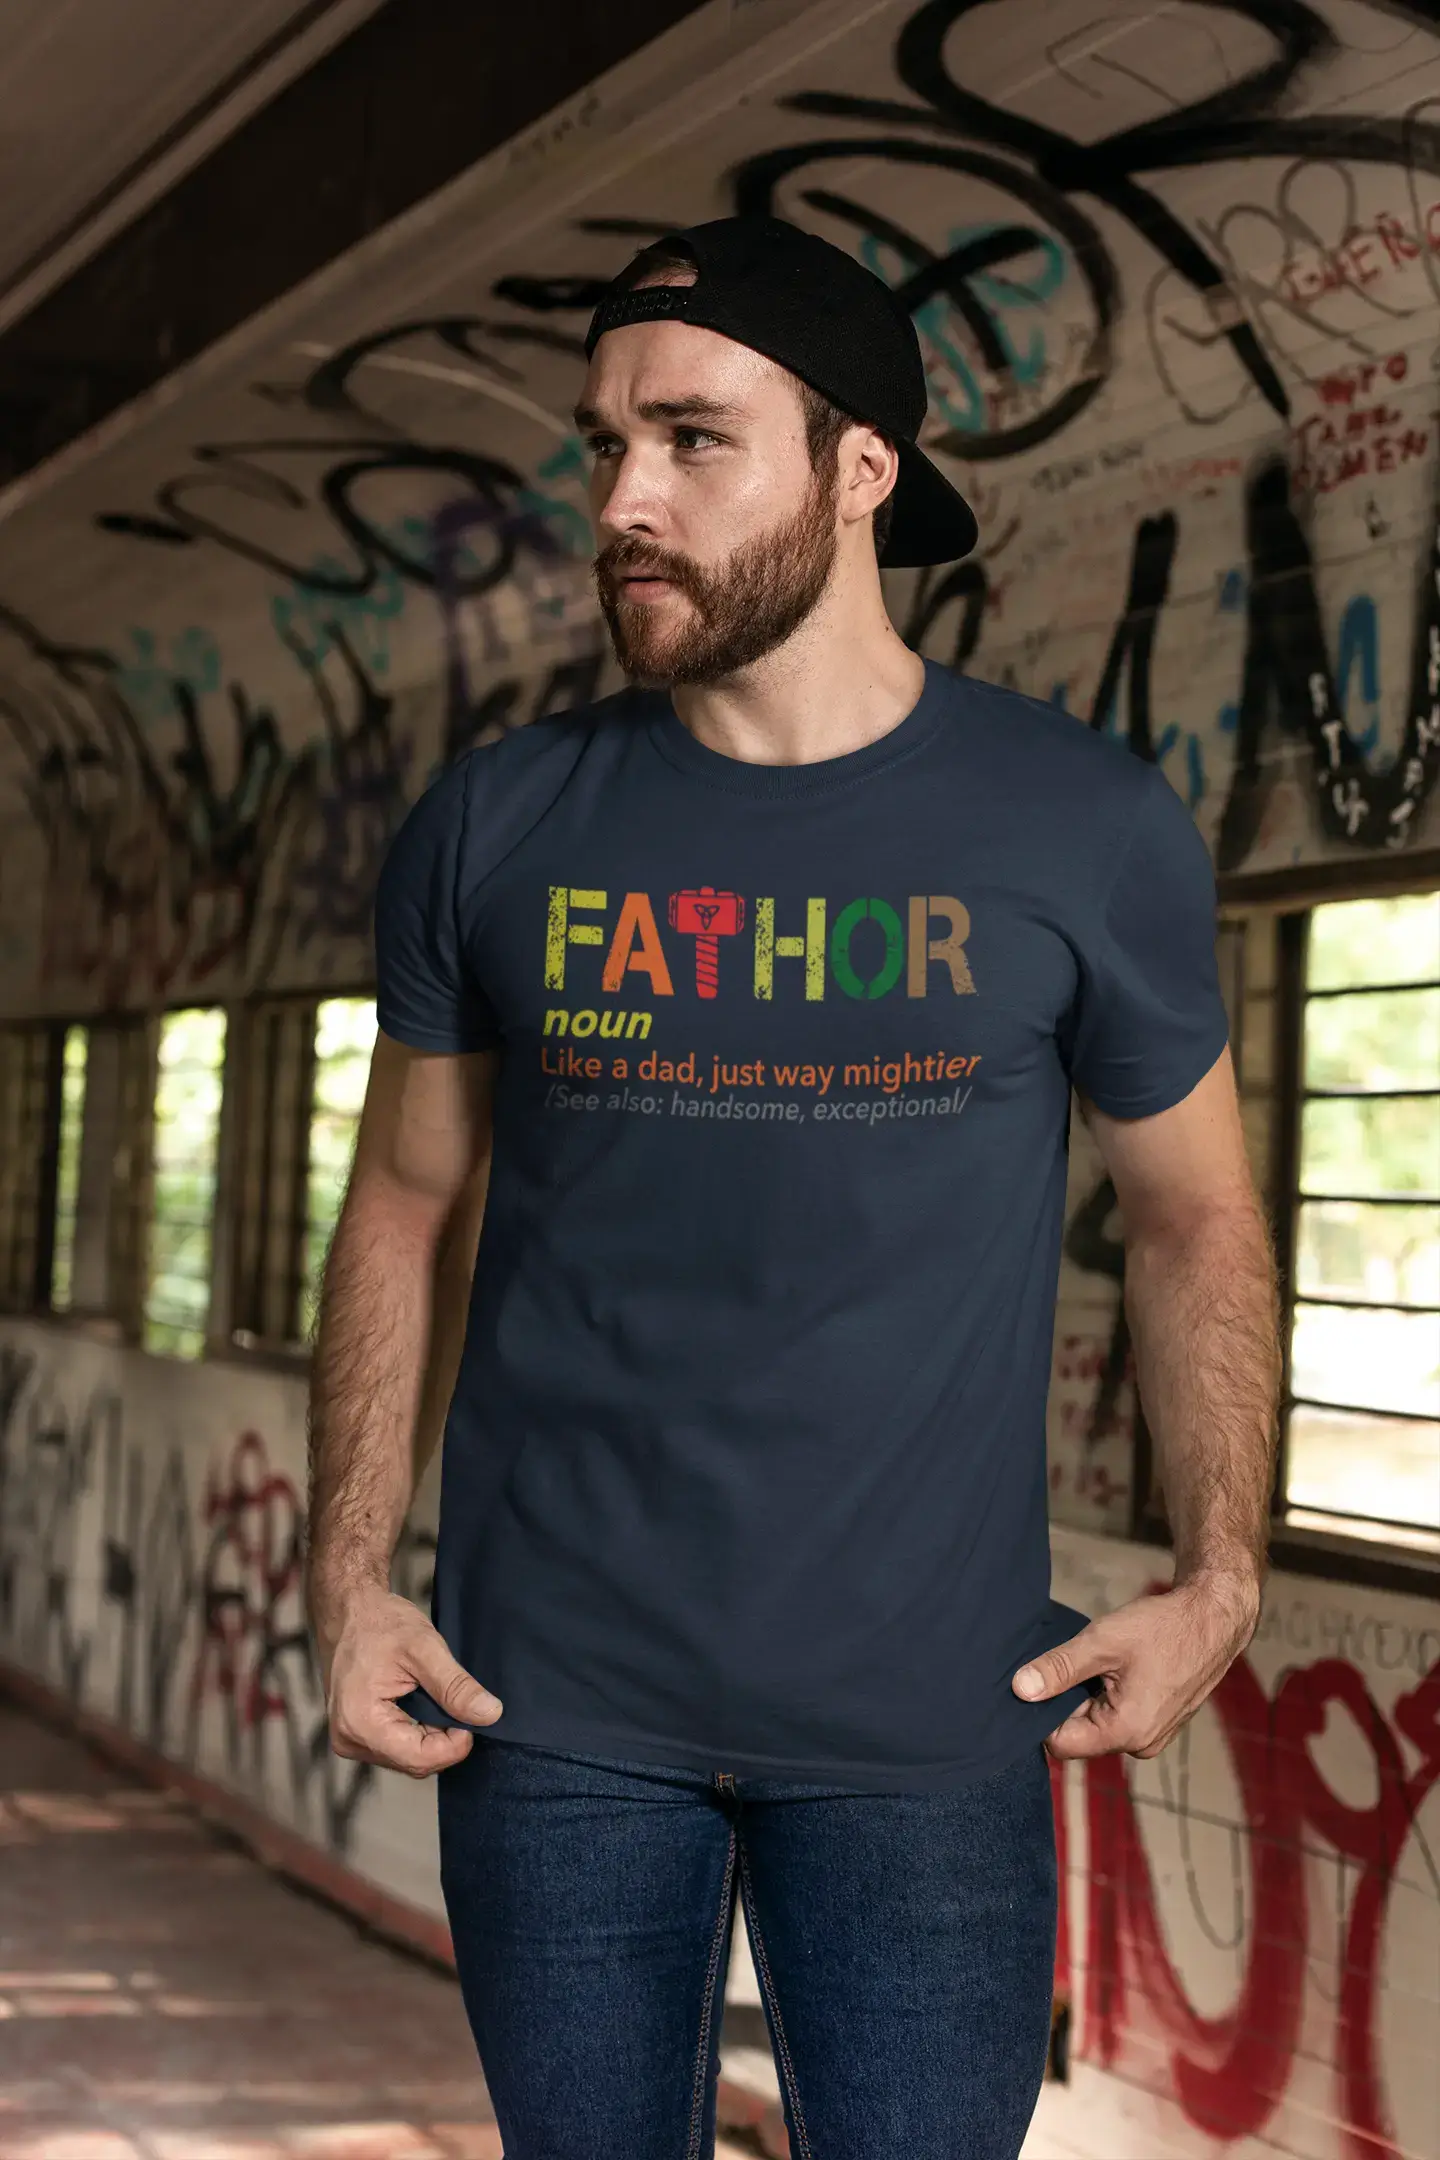 ULTRABASIC - Graphic Men's Fa-Thor Like Dad Just Way Mightier Shirt Printed Letters Navy